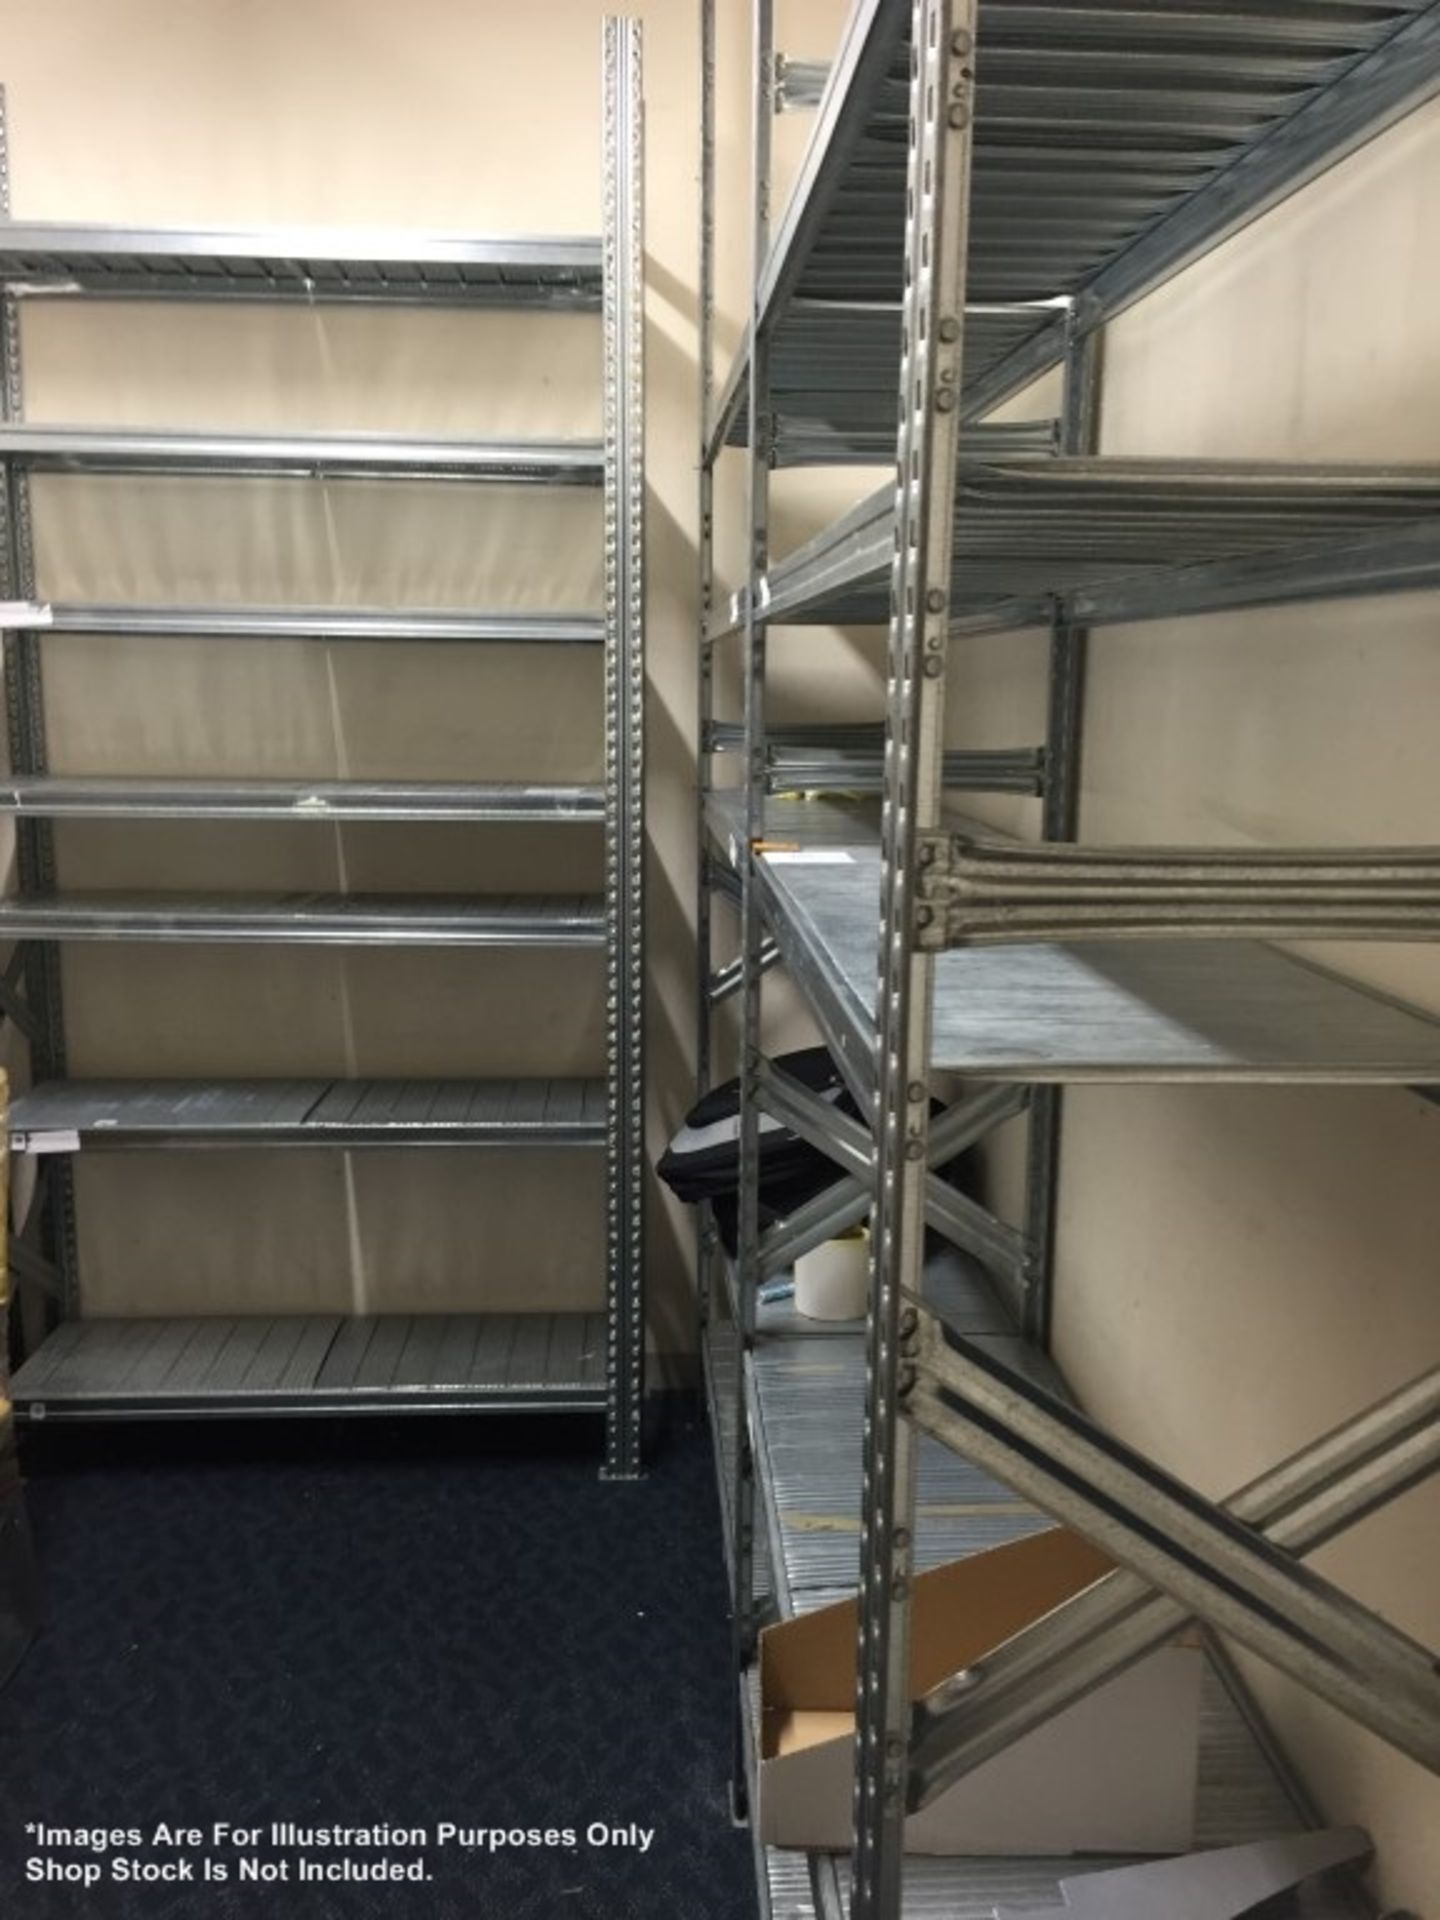 Job Lot of Italian made Metal Storage Racking with practical light weight shelving - Ideal for all - Image 4 of 6